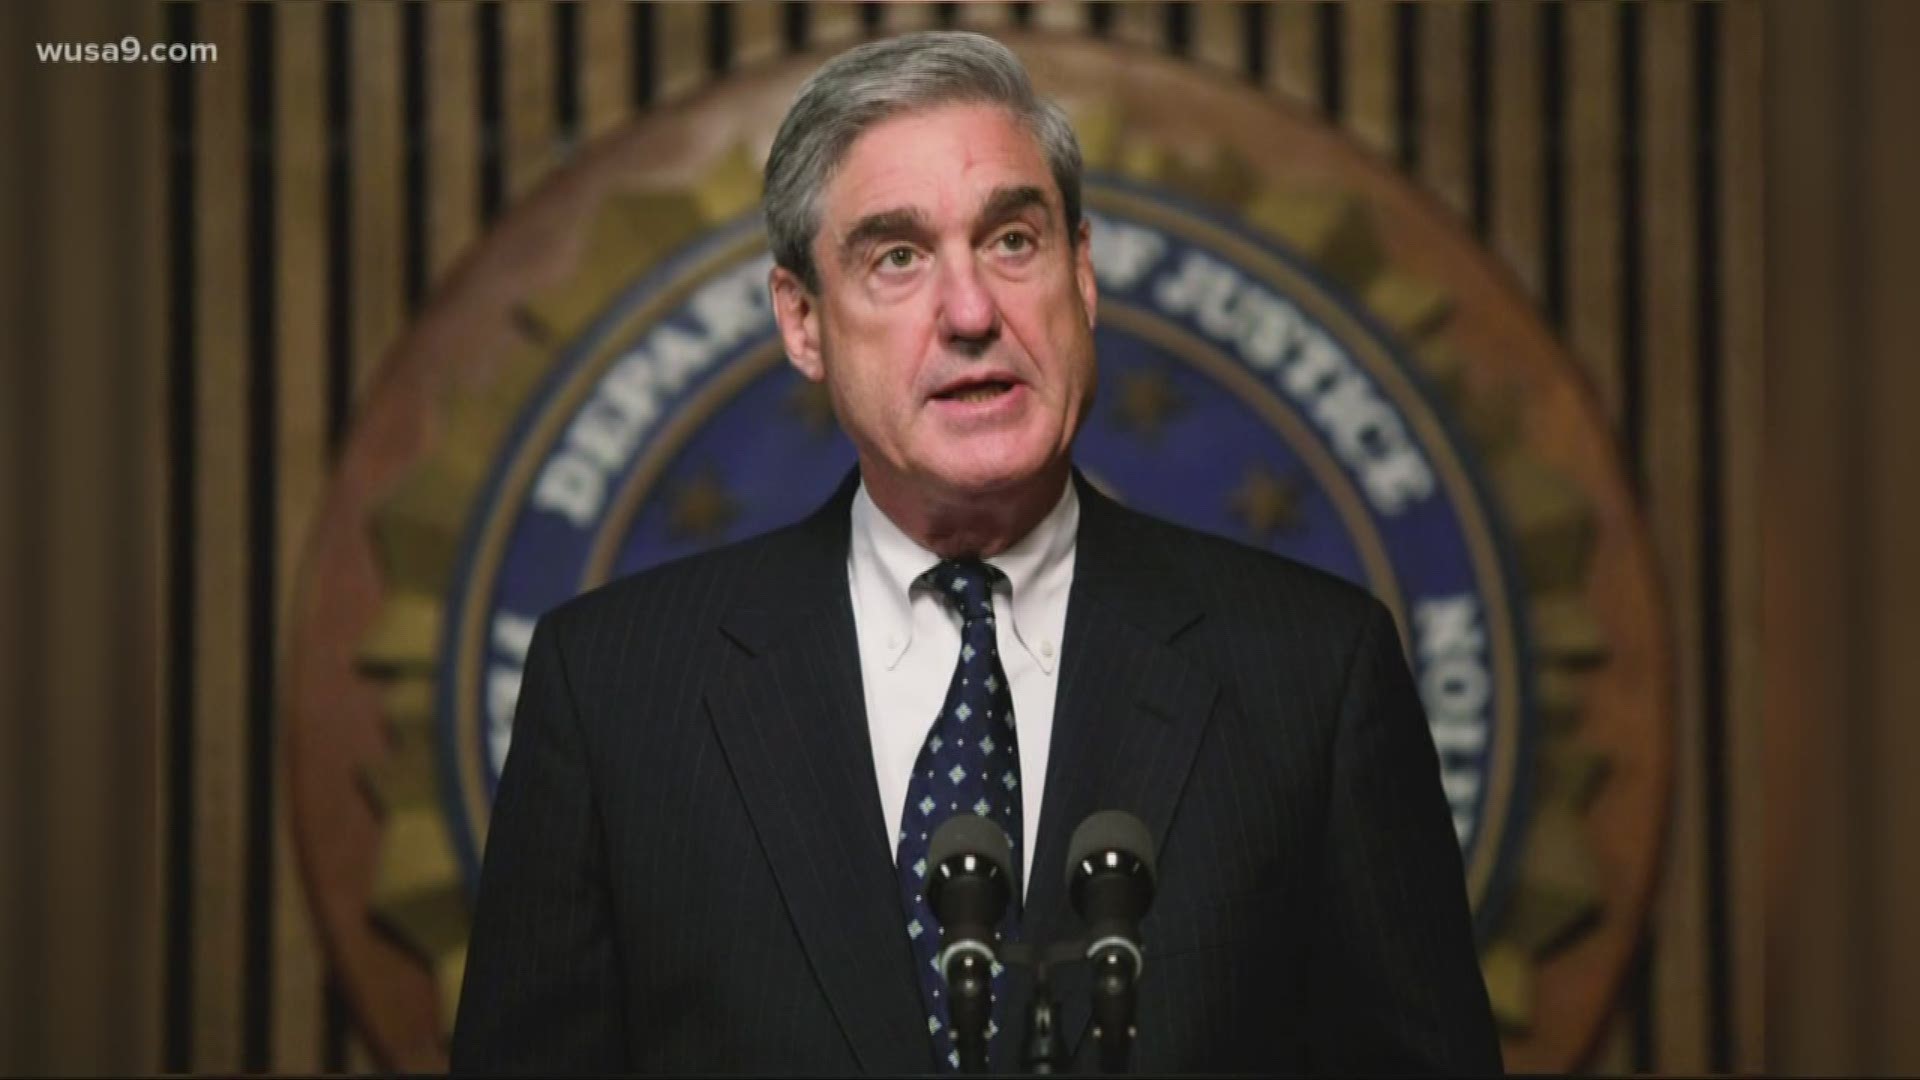 Here's what we know on the Mueller Report. President Trump has not been briefed yet on the contents. It is still in the hands of Attorney General William Barr and a small group of staffers. They've been analyzing it and deciding how much will be released to Congress, the President and the public.